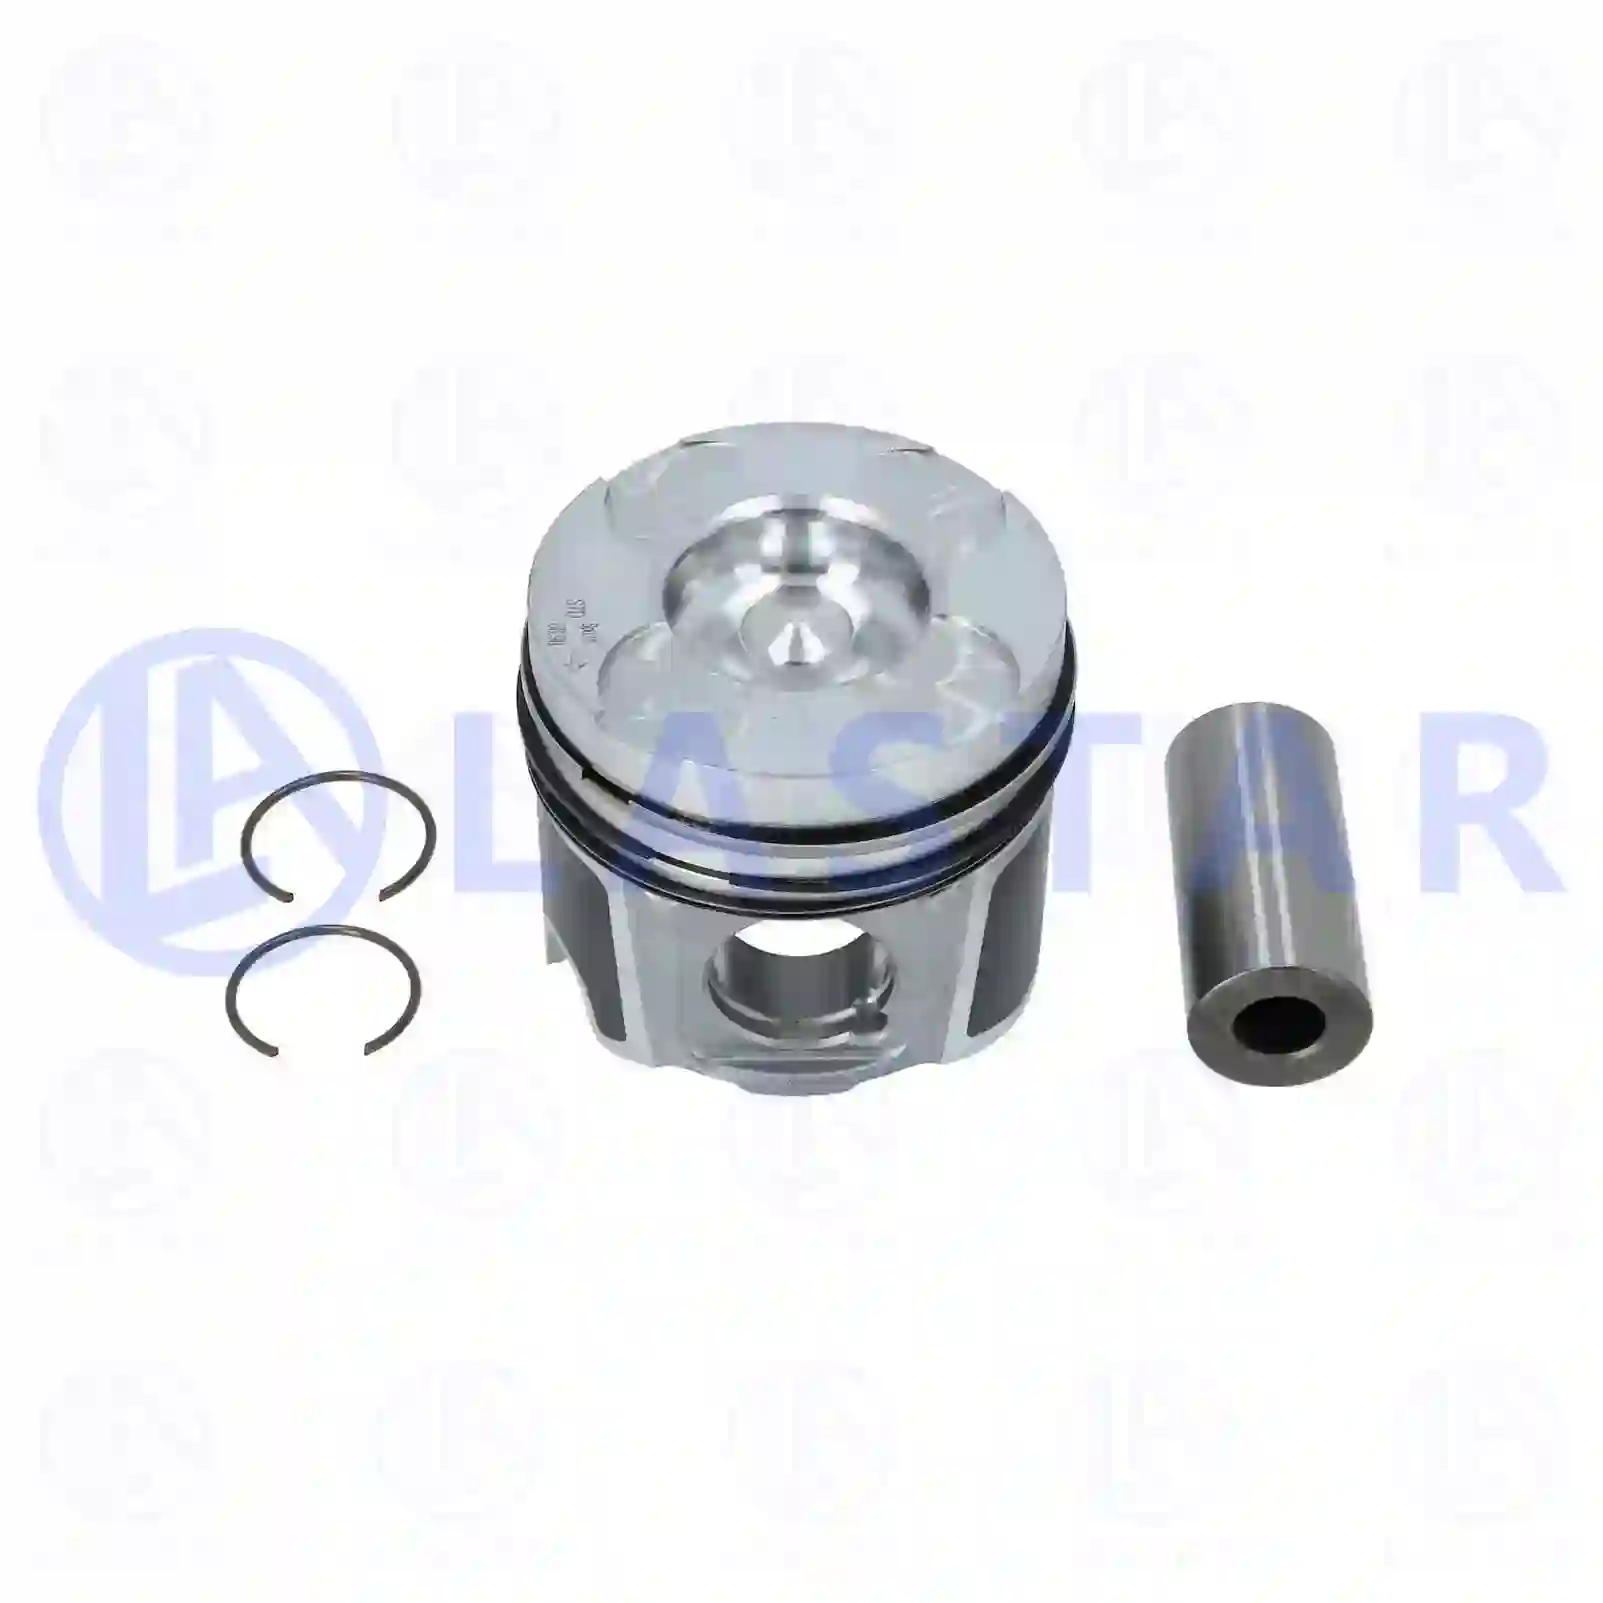 Piston, complete with rings, 77701676, 93161476, 93161477, 4430864, 4430865, 7701477121, 8200129575, 8200129576, 8200216561, 8200216564 ||  77701676 Lastar Spare Part | Truck Spare Parts, Auotomotive Spare Parts Piston, complete with rings, 77701676, 93161476, 93161477, 4430864, 4430865, 7701477121, 8200129575, 8200129576, 8200216561, 8200216564 ||  77701676 Lastar Spare Part | Truck Spare Parts, Auotomotive Spare Parts